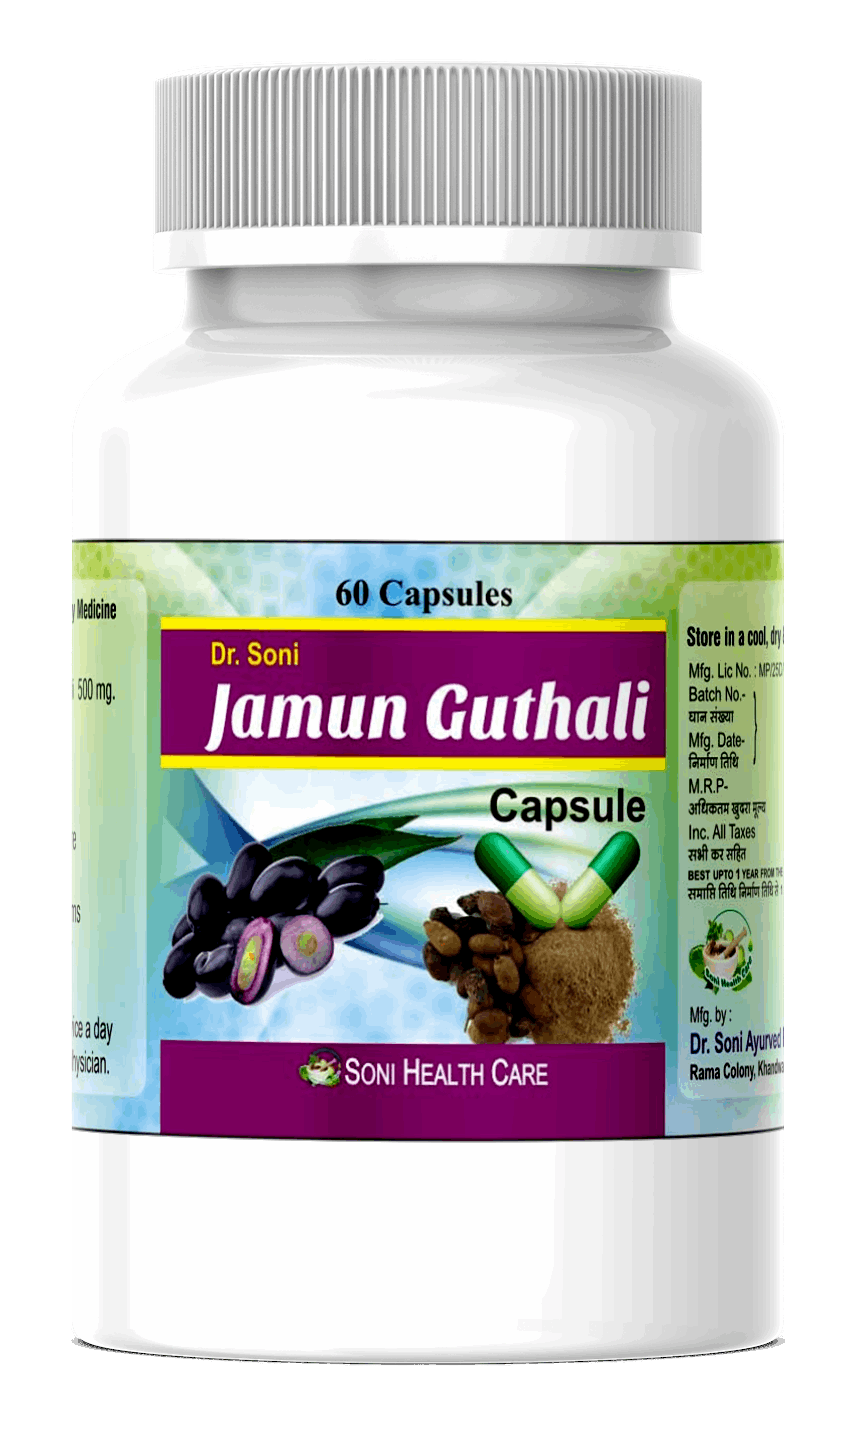 Dr. Soni Jamun Guthali Extract Capsules for Sugar Control & Detoxification (60 Capsule X 500mg)